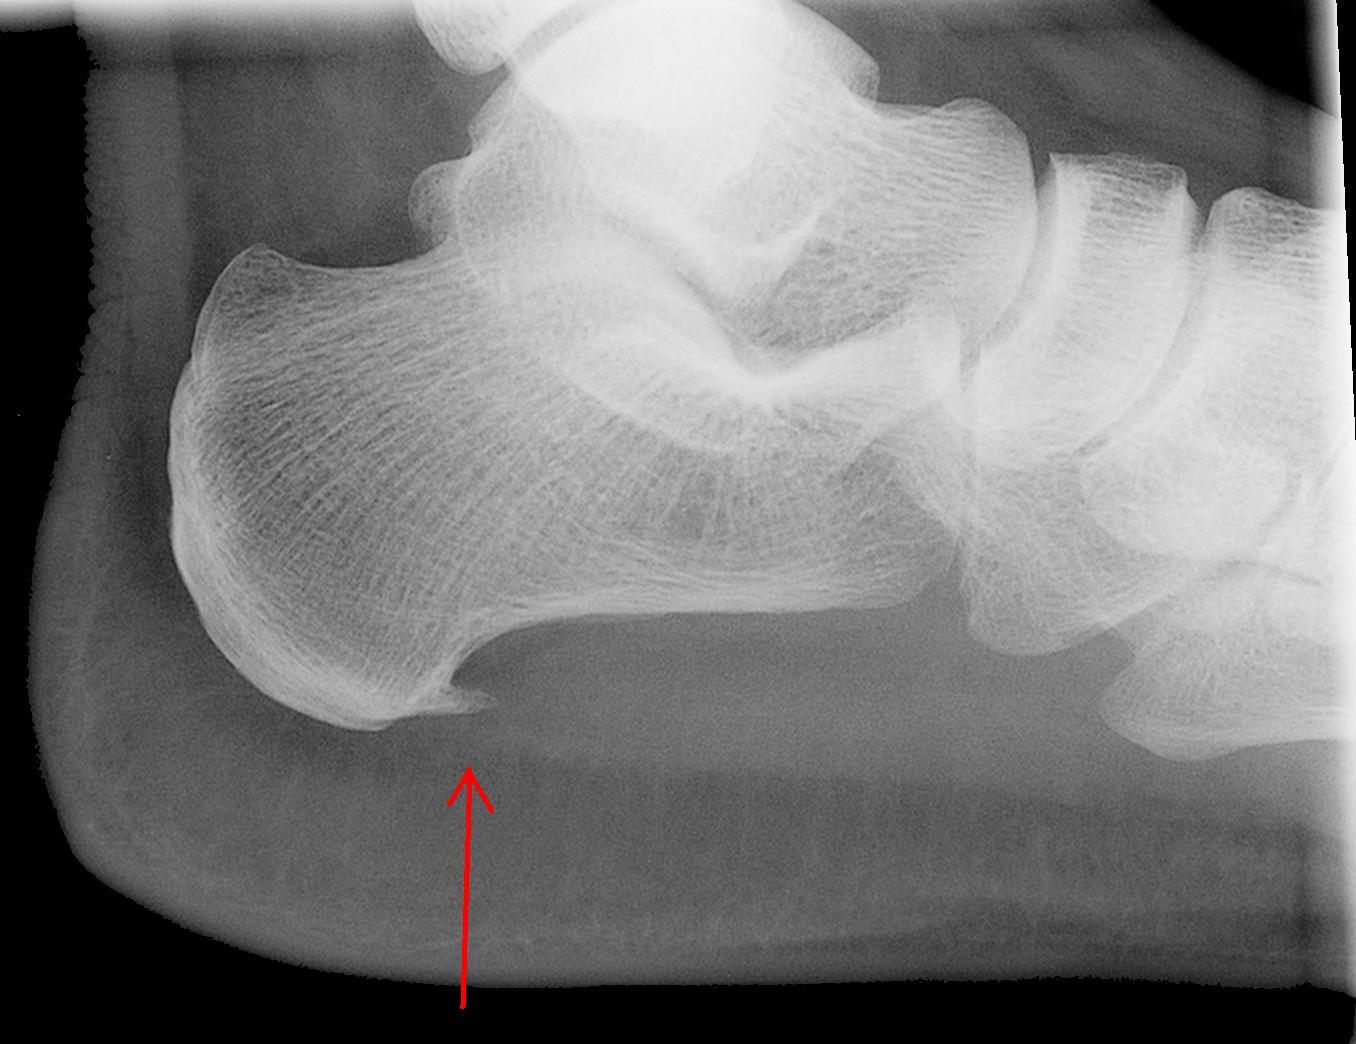 Heel spur and its relationship to 